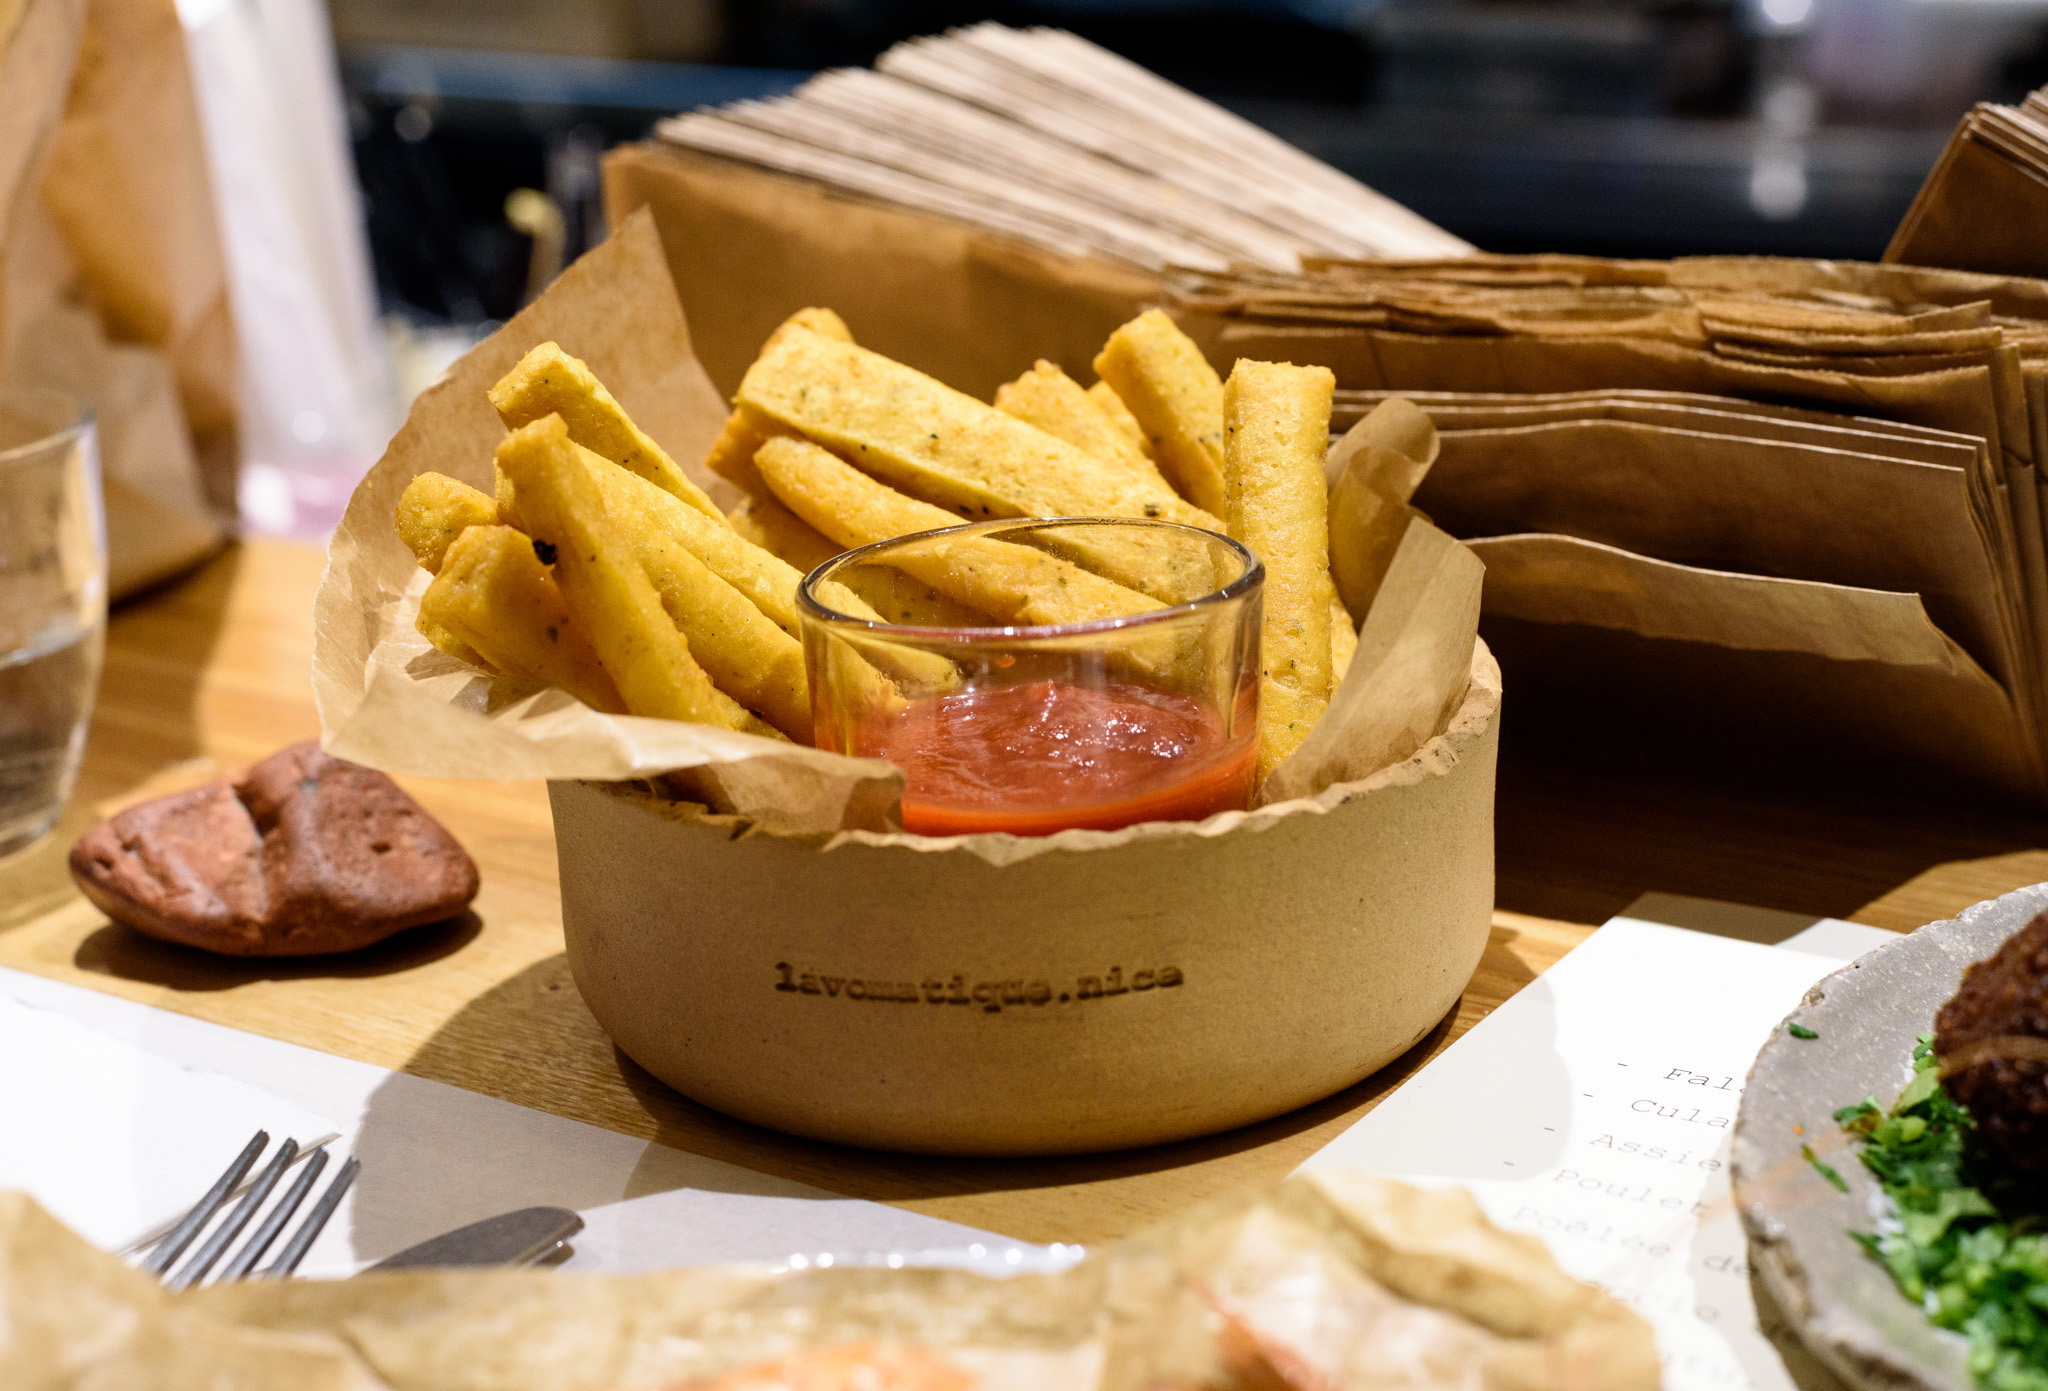 A clay bowl etched with the name Lavomatique, lined with paper and stuffed with sticks of fried panisse, along with a deep red dipping sauce. 